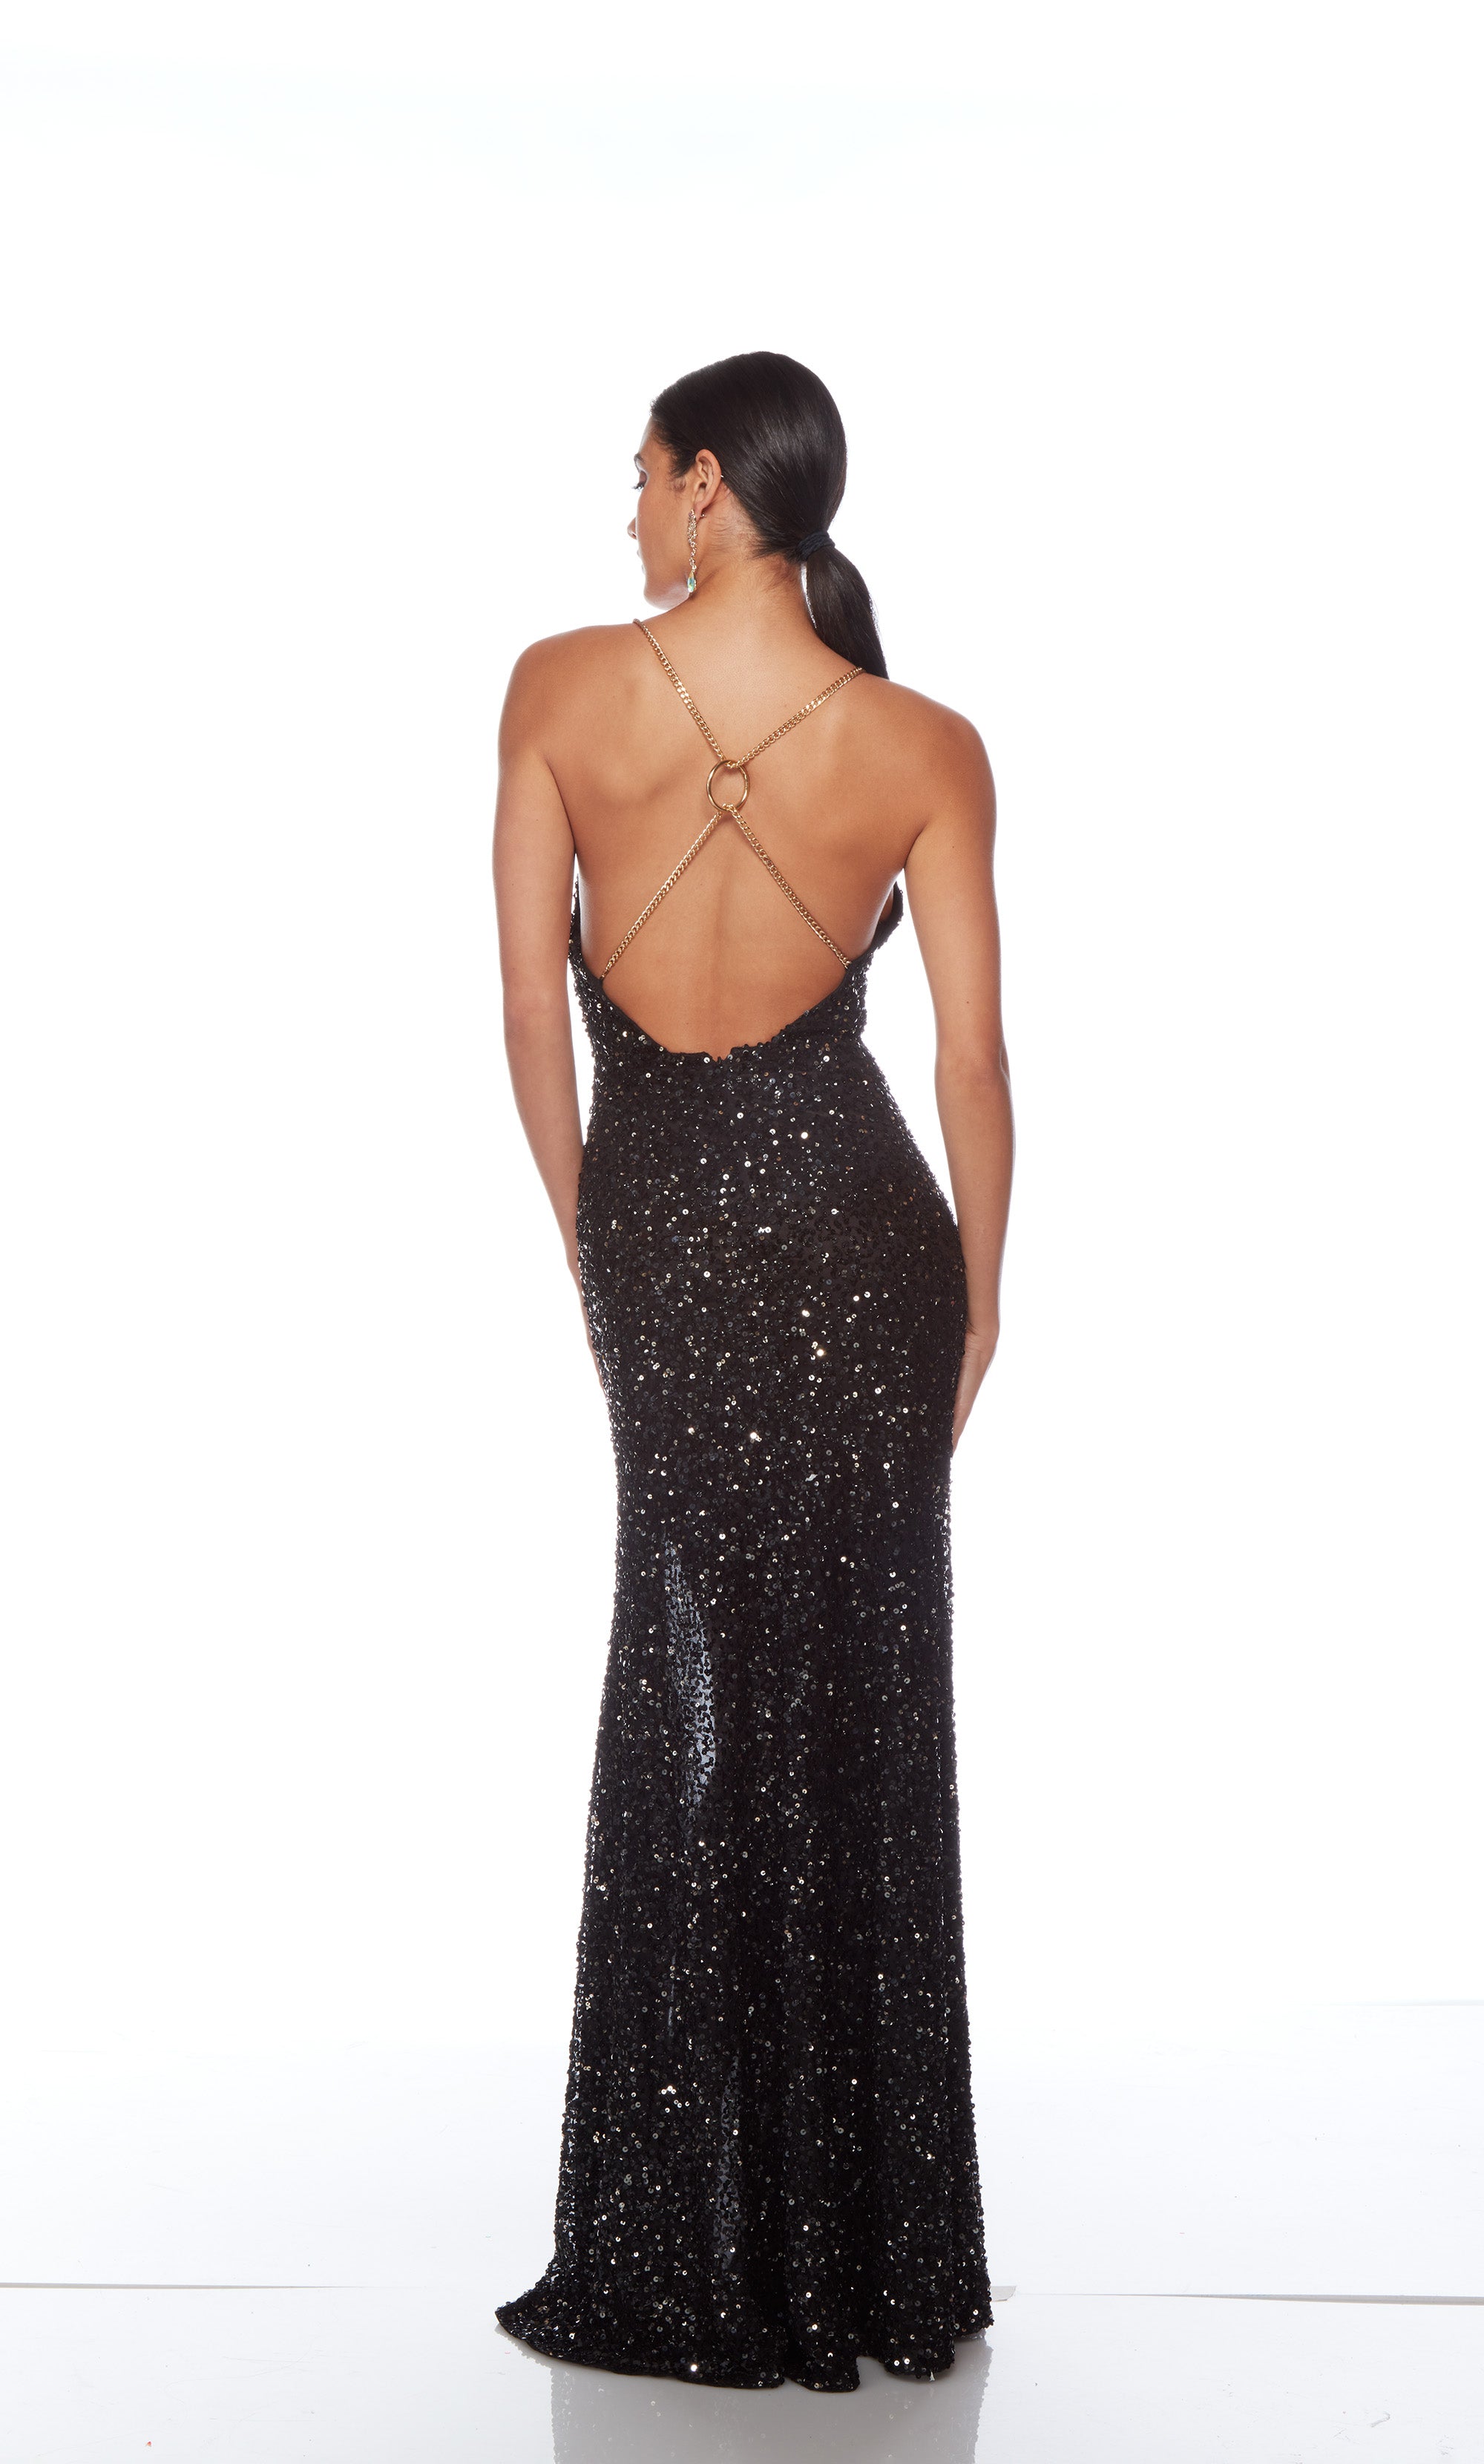 Sophisticated black sequin gown: Plunging neckline, slit, gold chain straps for an edgy and elegant vibe.